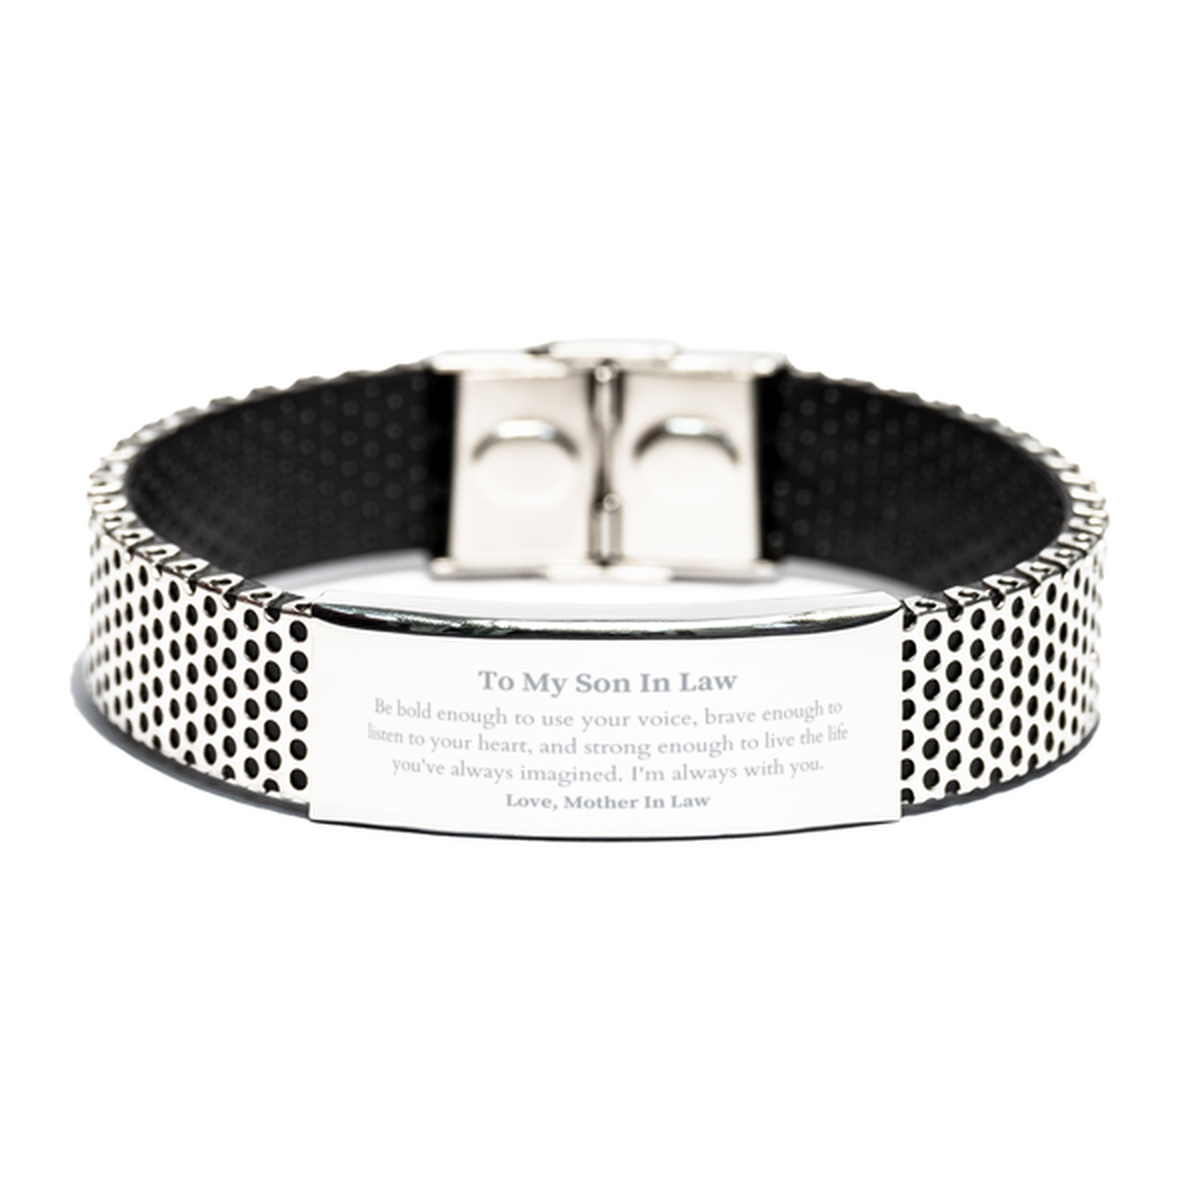 Keepsake Son In Law Stainless Steel Bracelet Gift Idea Graduation Christmas Birthday Son In Law from Mother In Law, Son In Law Be bold enough to use your voice, brave enough to listen to your heart. Love, Mother In Law